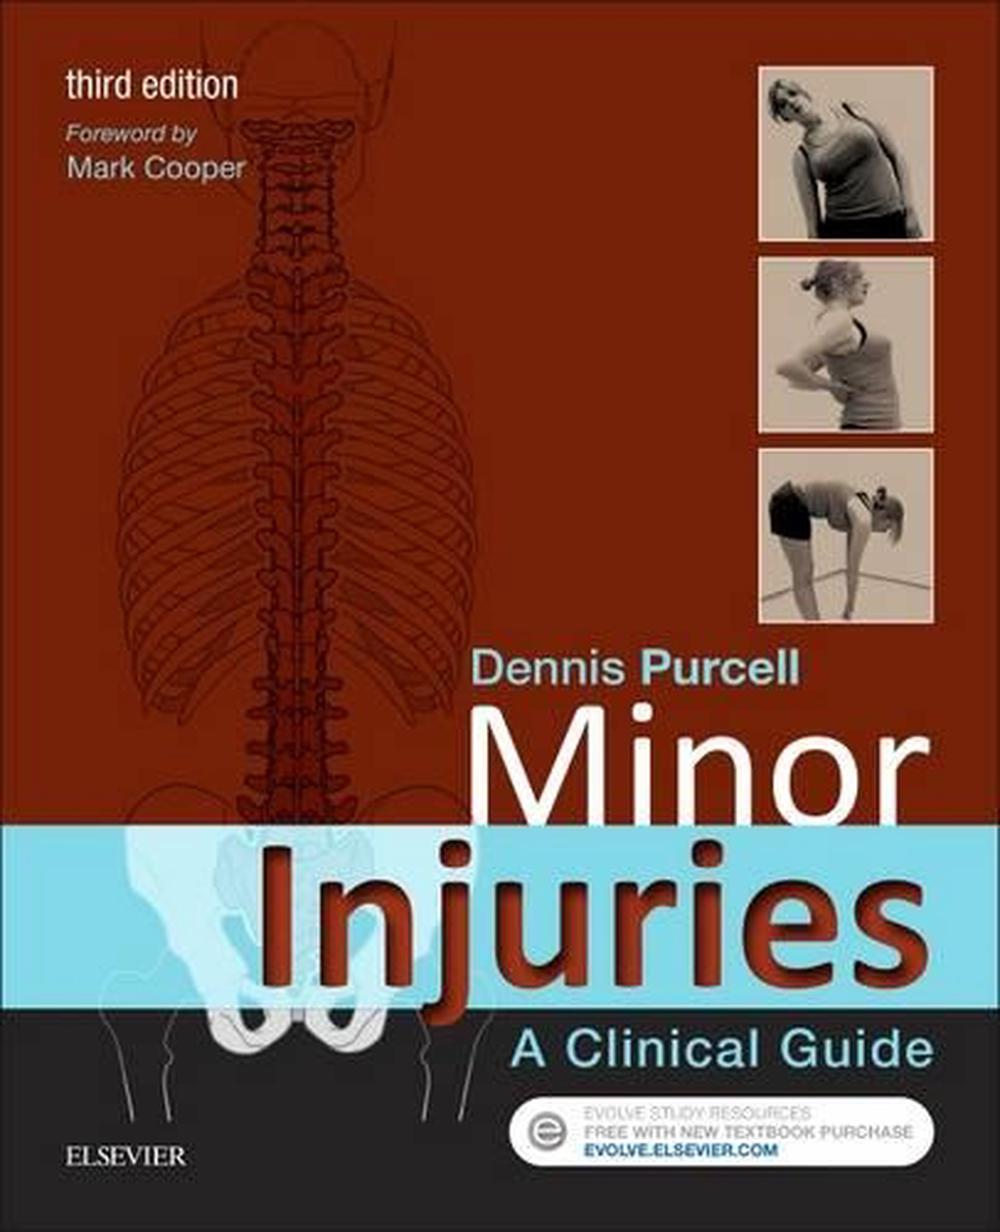 The　Buy　at　Purcell,　by　Minor　online　9780702066696　Paperback,　Dennis　Injuries　Nile